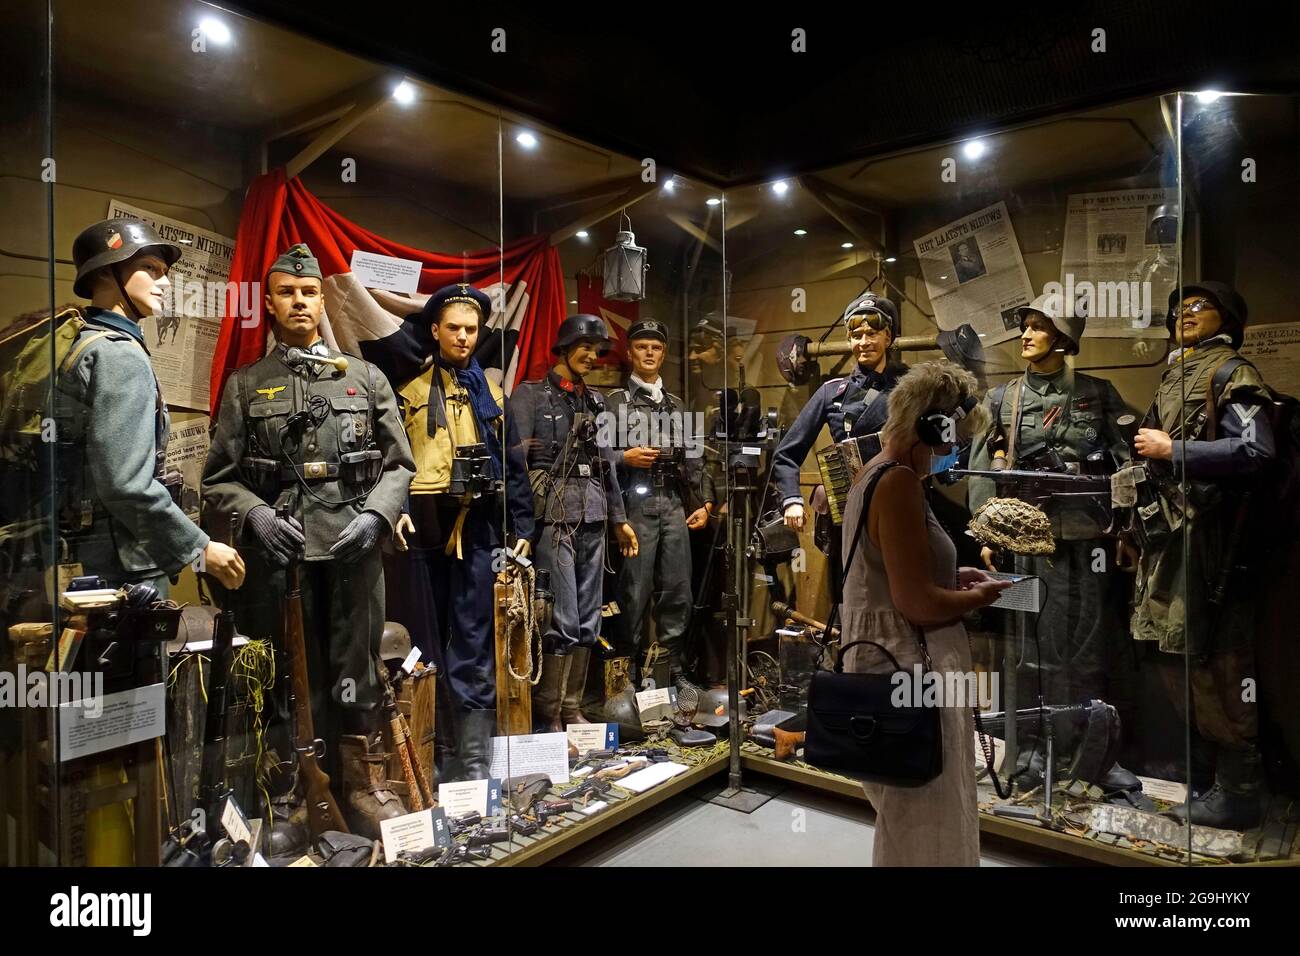 German World War Two military uniforms on display at the For Freedom Museum about WWII at Ramskapelle, Knokke-Heist, West Flanders, Belgium Stock Photo